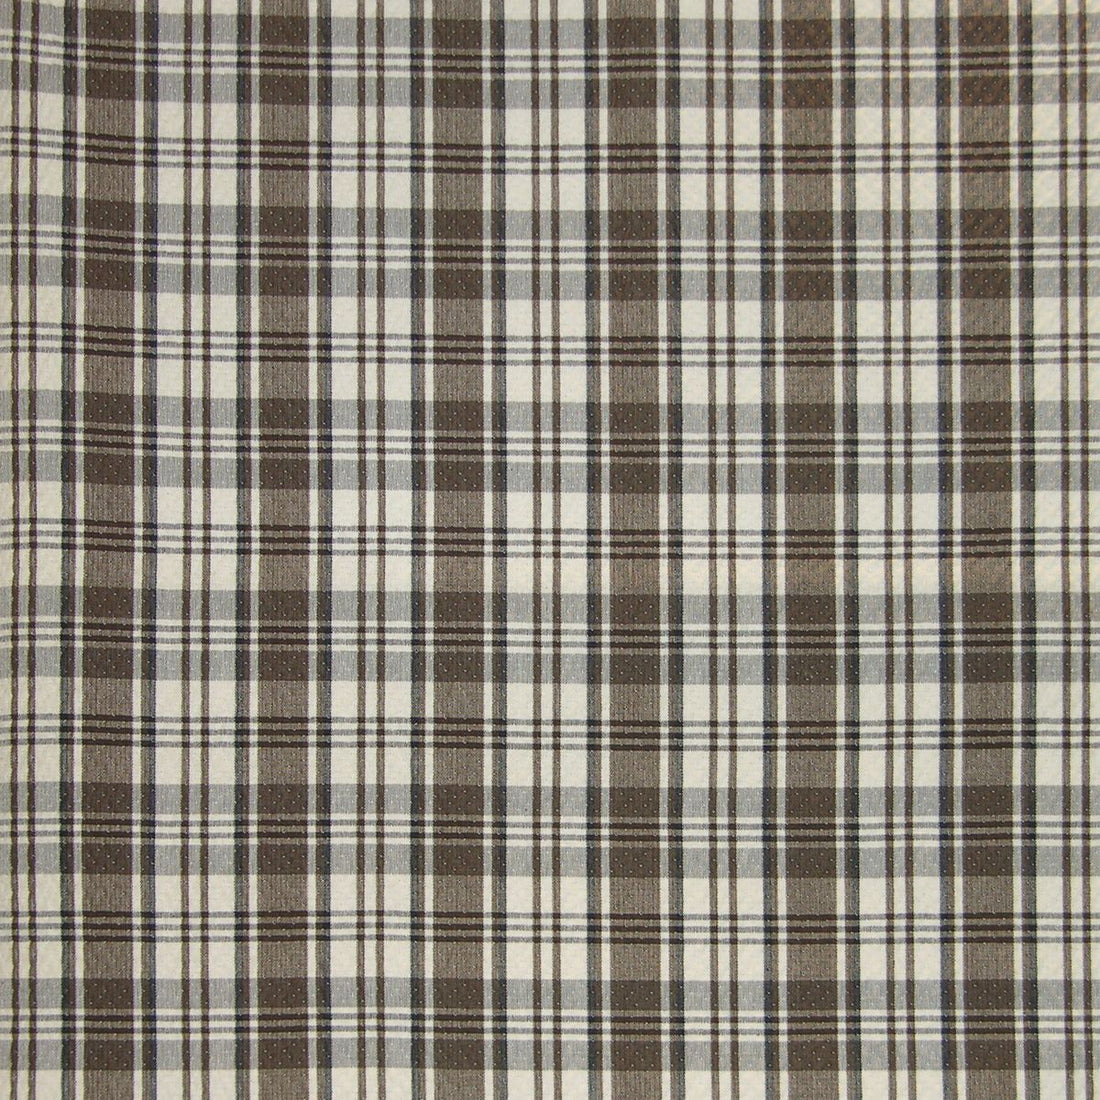 Roxbury fabric in brown color - pattern number MI 00041780 - by Scalamandre in the Old World Weavers collection